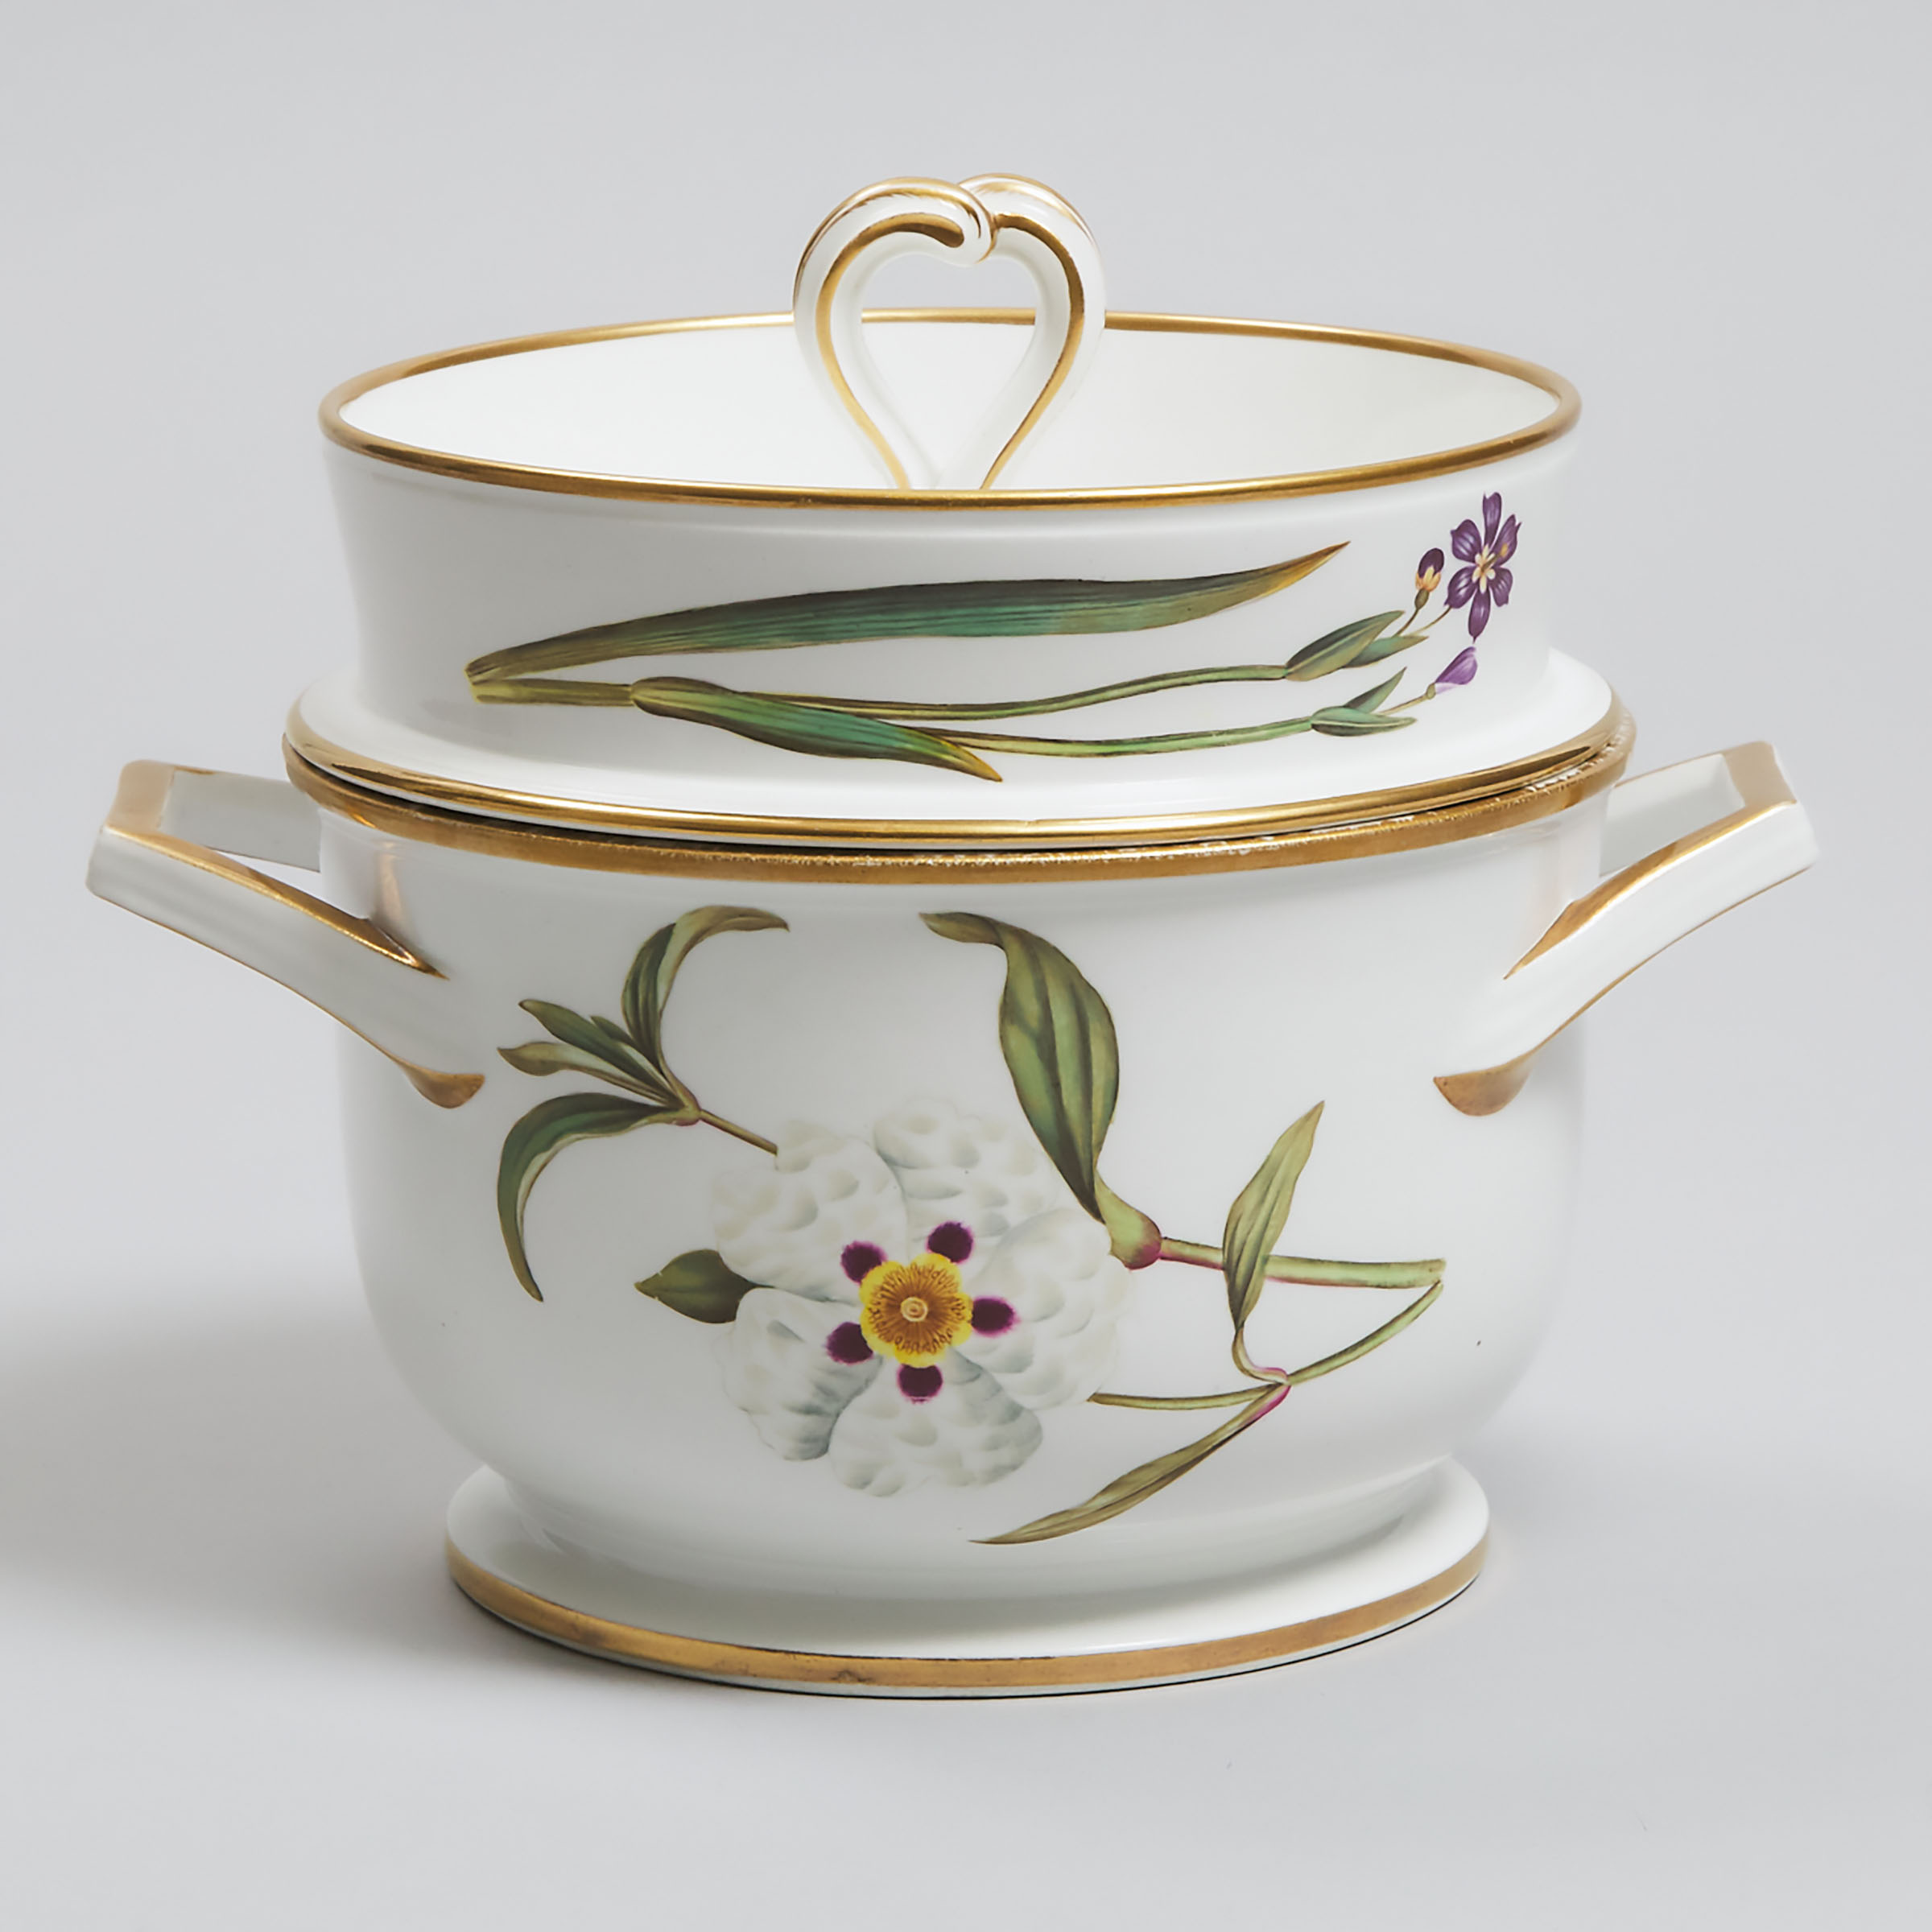 Spode Botanical Ice Pail and Cover, c.1815